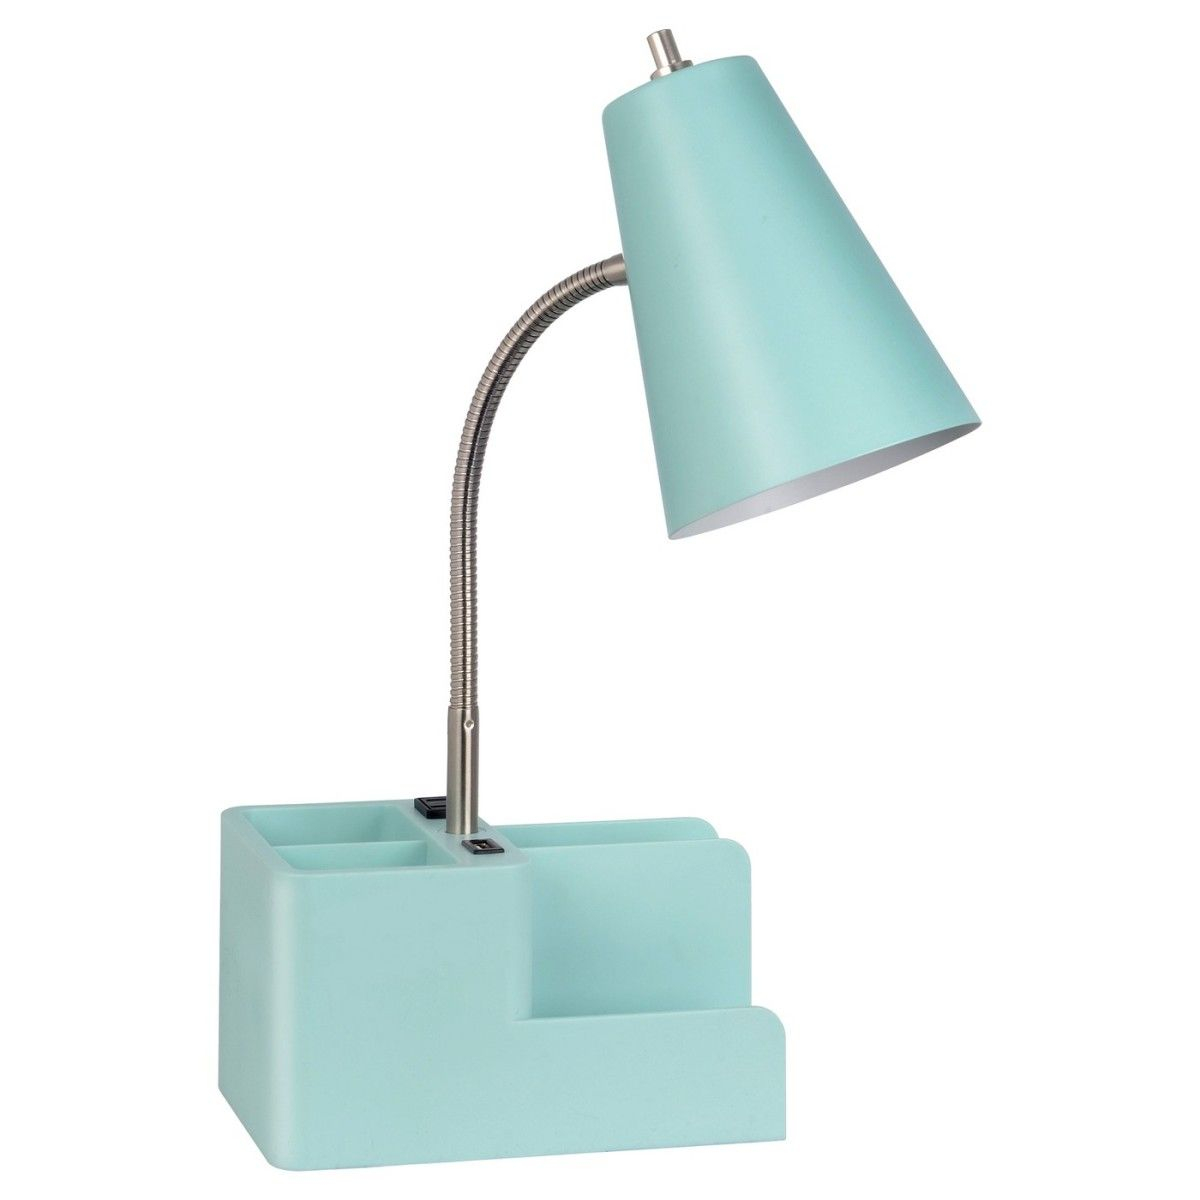 The Best Desk Lamps To Brighten Up Your Dorm Room Dorm throughout sizing 1200 X 1200